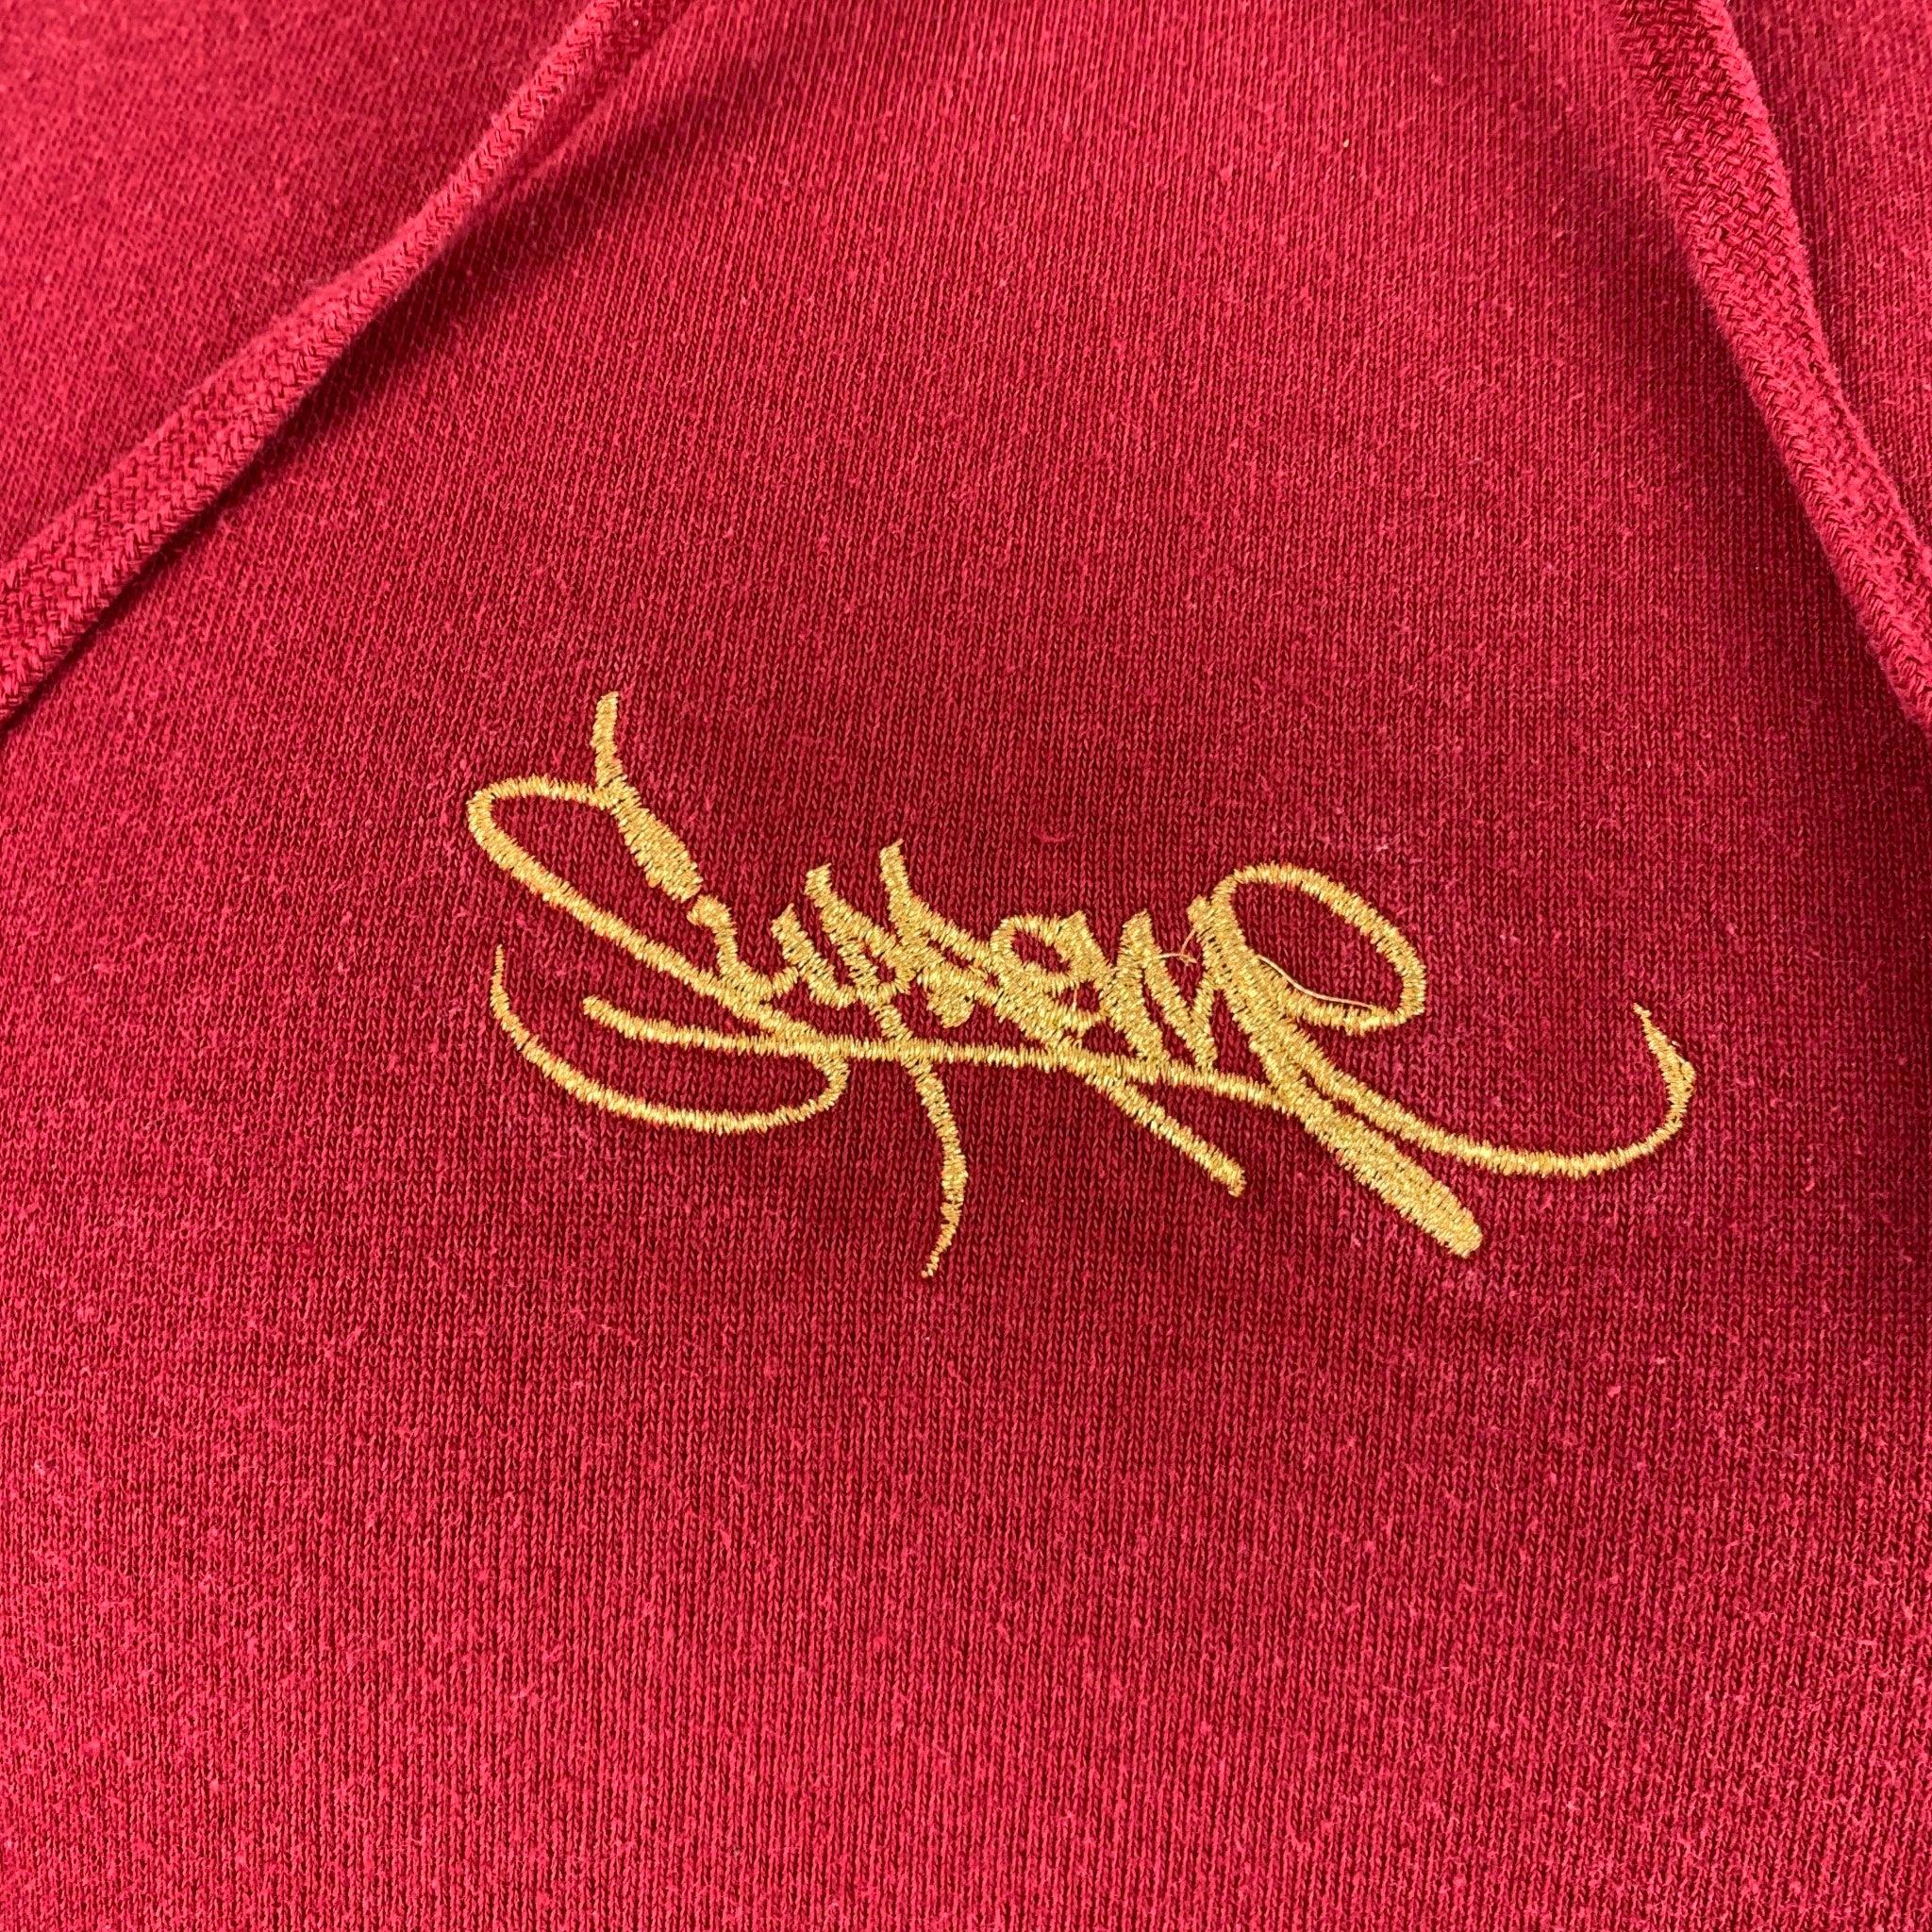 SUPREME sweatshirt
in a
burgundy cotton knit featuring a hooded style, gold Supreme embroidery, and kangaroo pockets. Made in Canada.Very Good Pre-Owned Condition. Moderate signs of wear. 

Marked:   M 

Measurements: 
 
Shoulder: 19 inches Chest: